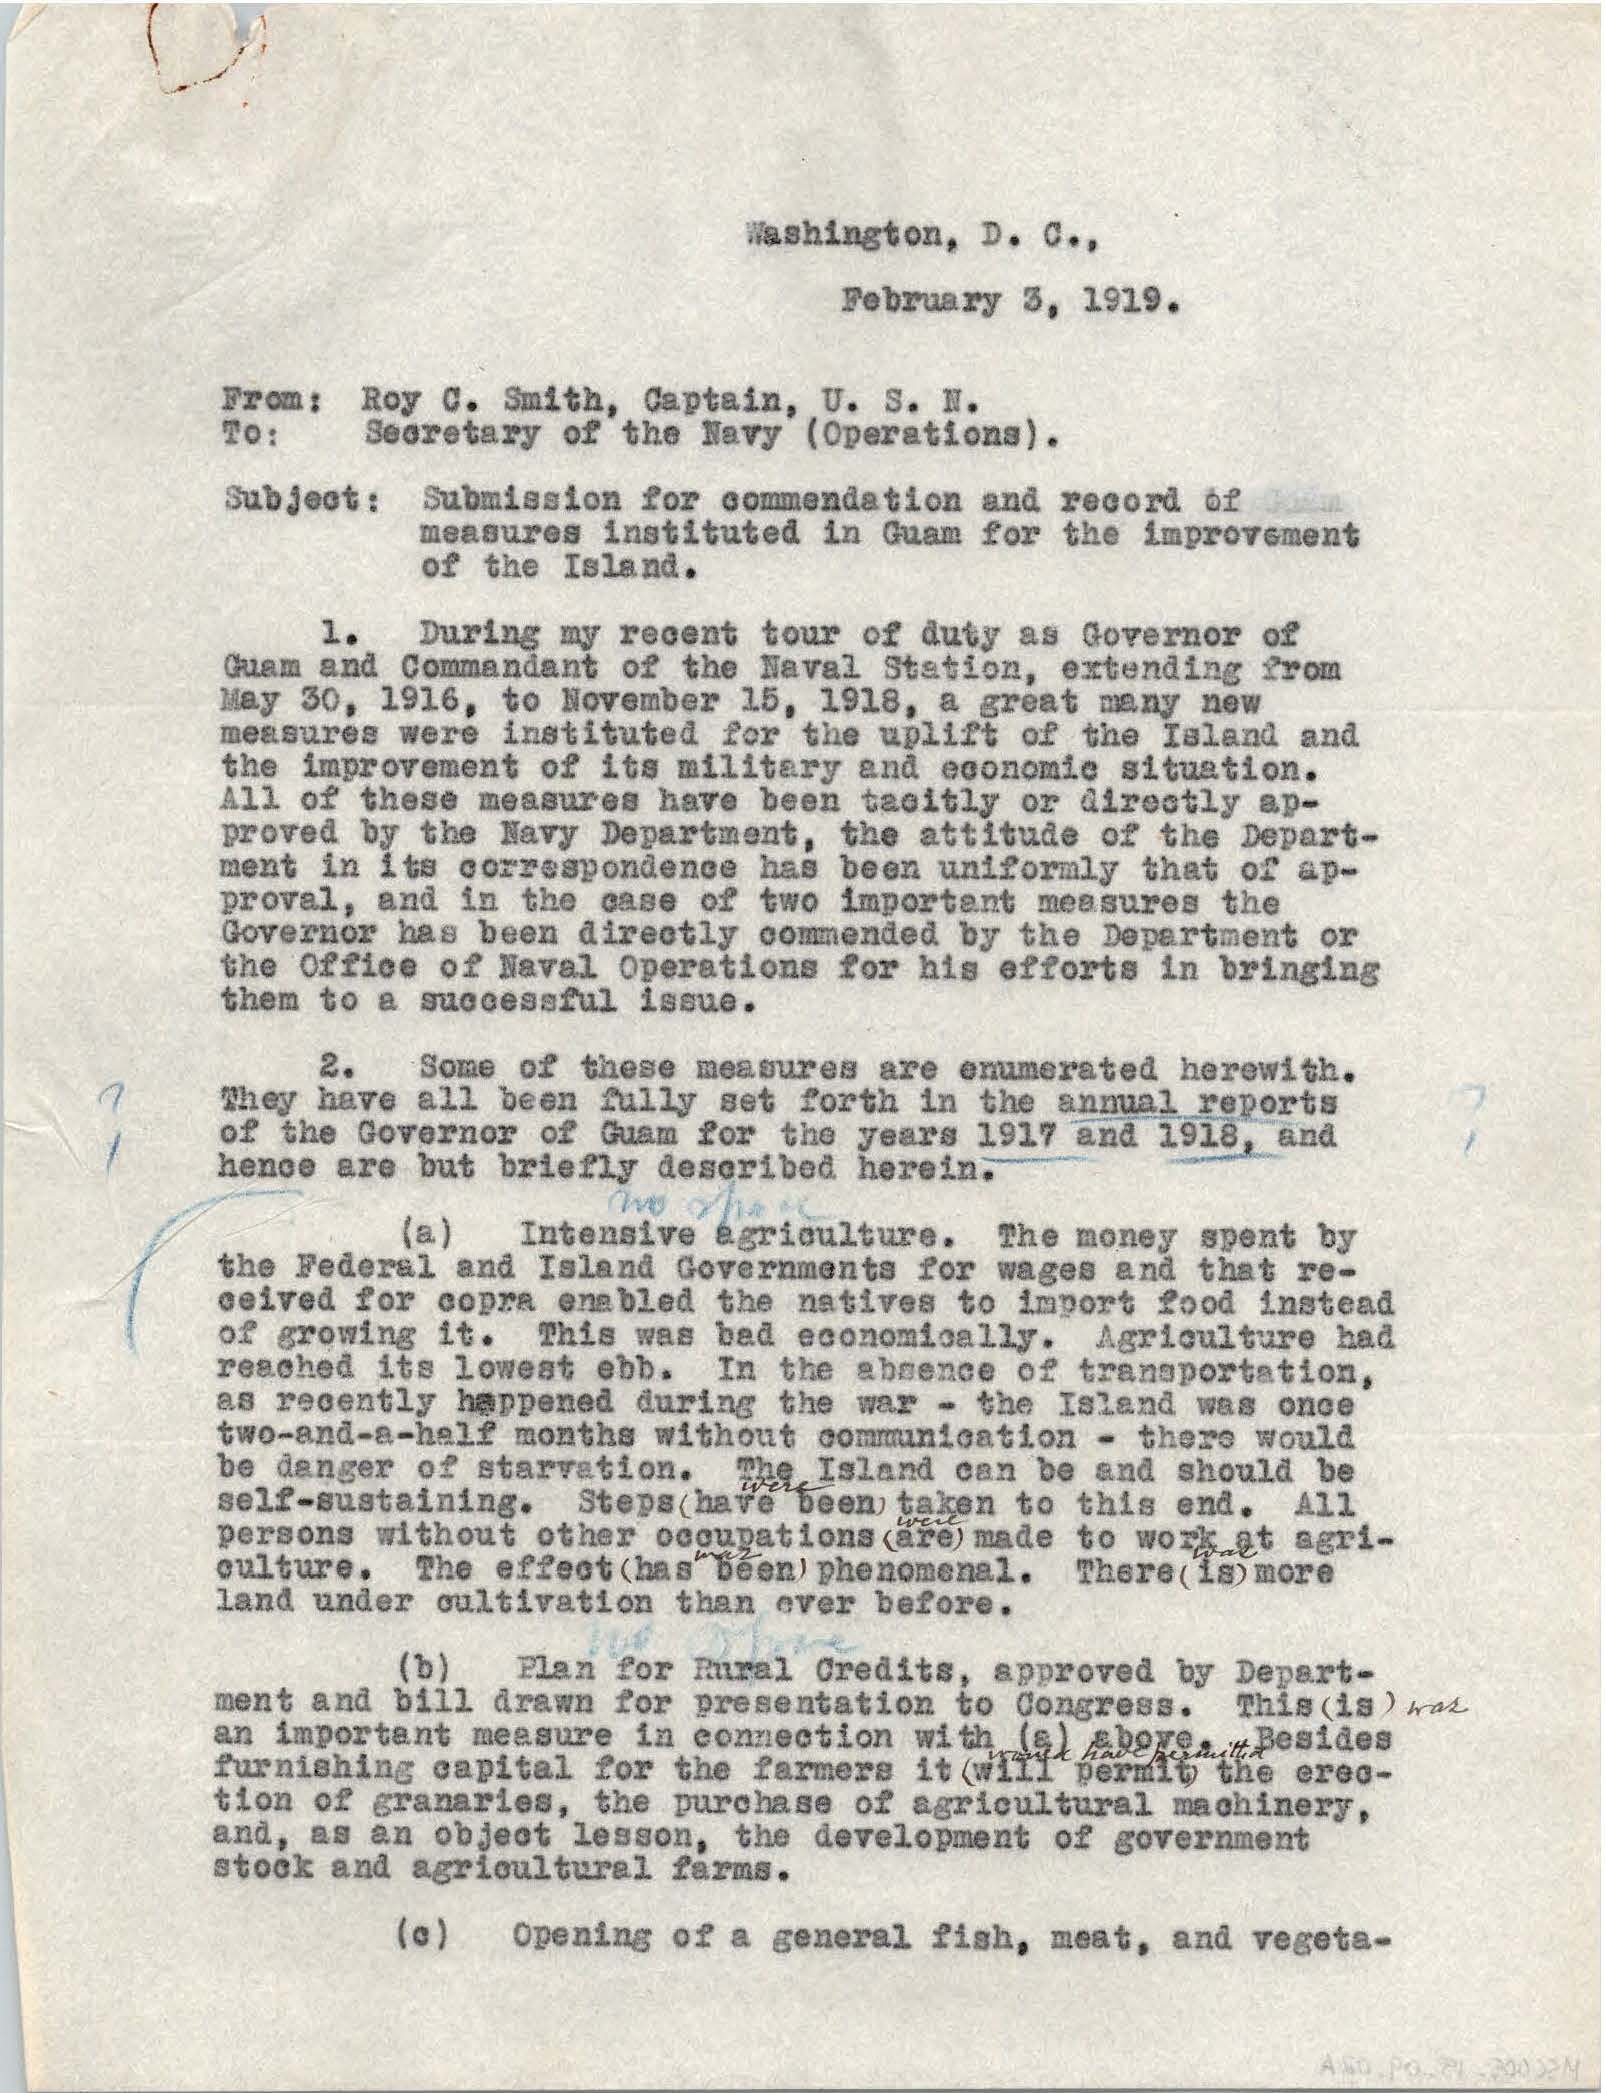 Letter from Roy Campbell Smith to the Secretary of the Navy